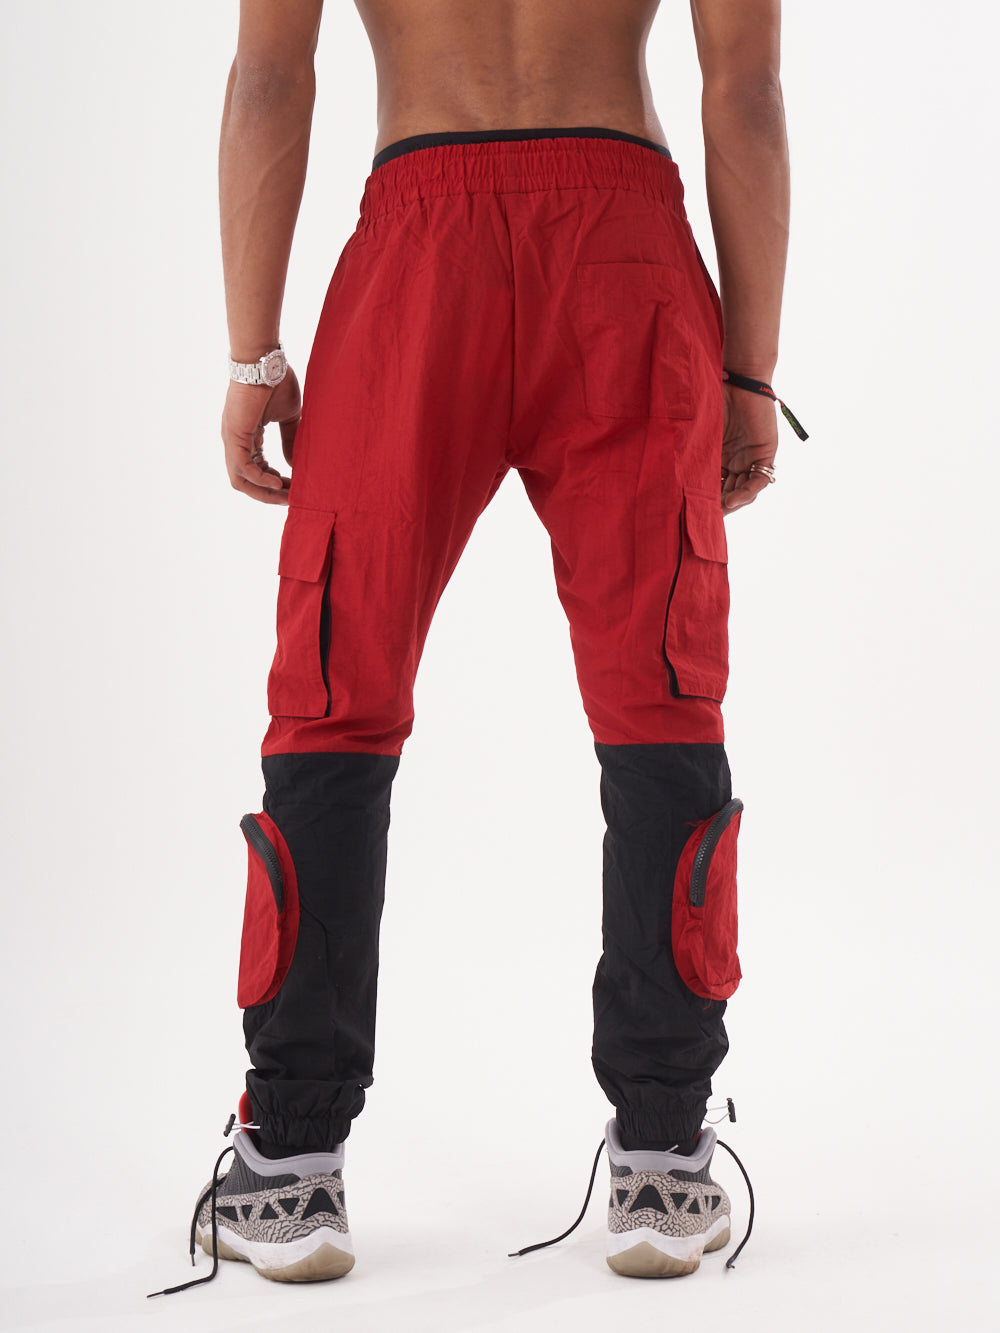 The back view of a man wearing RENEGADE | RED cargo pants.